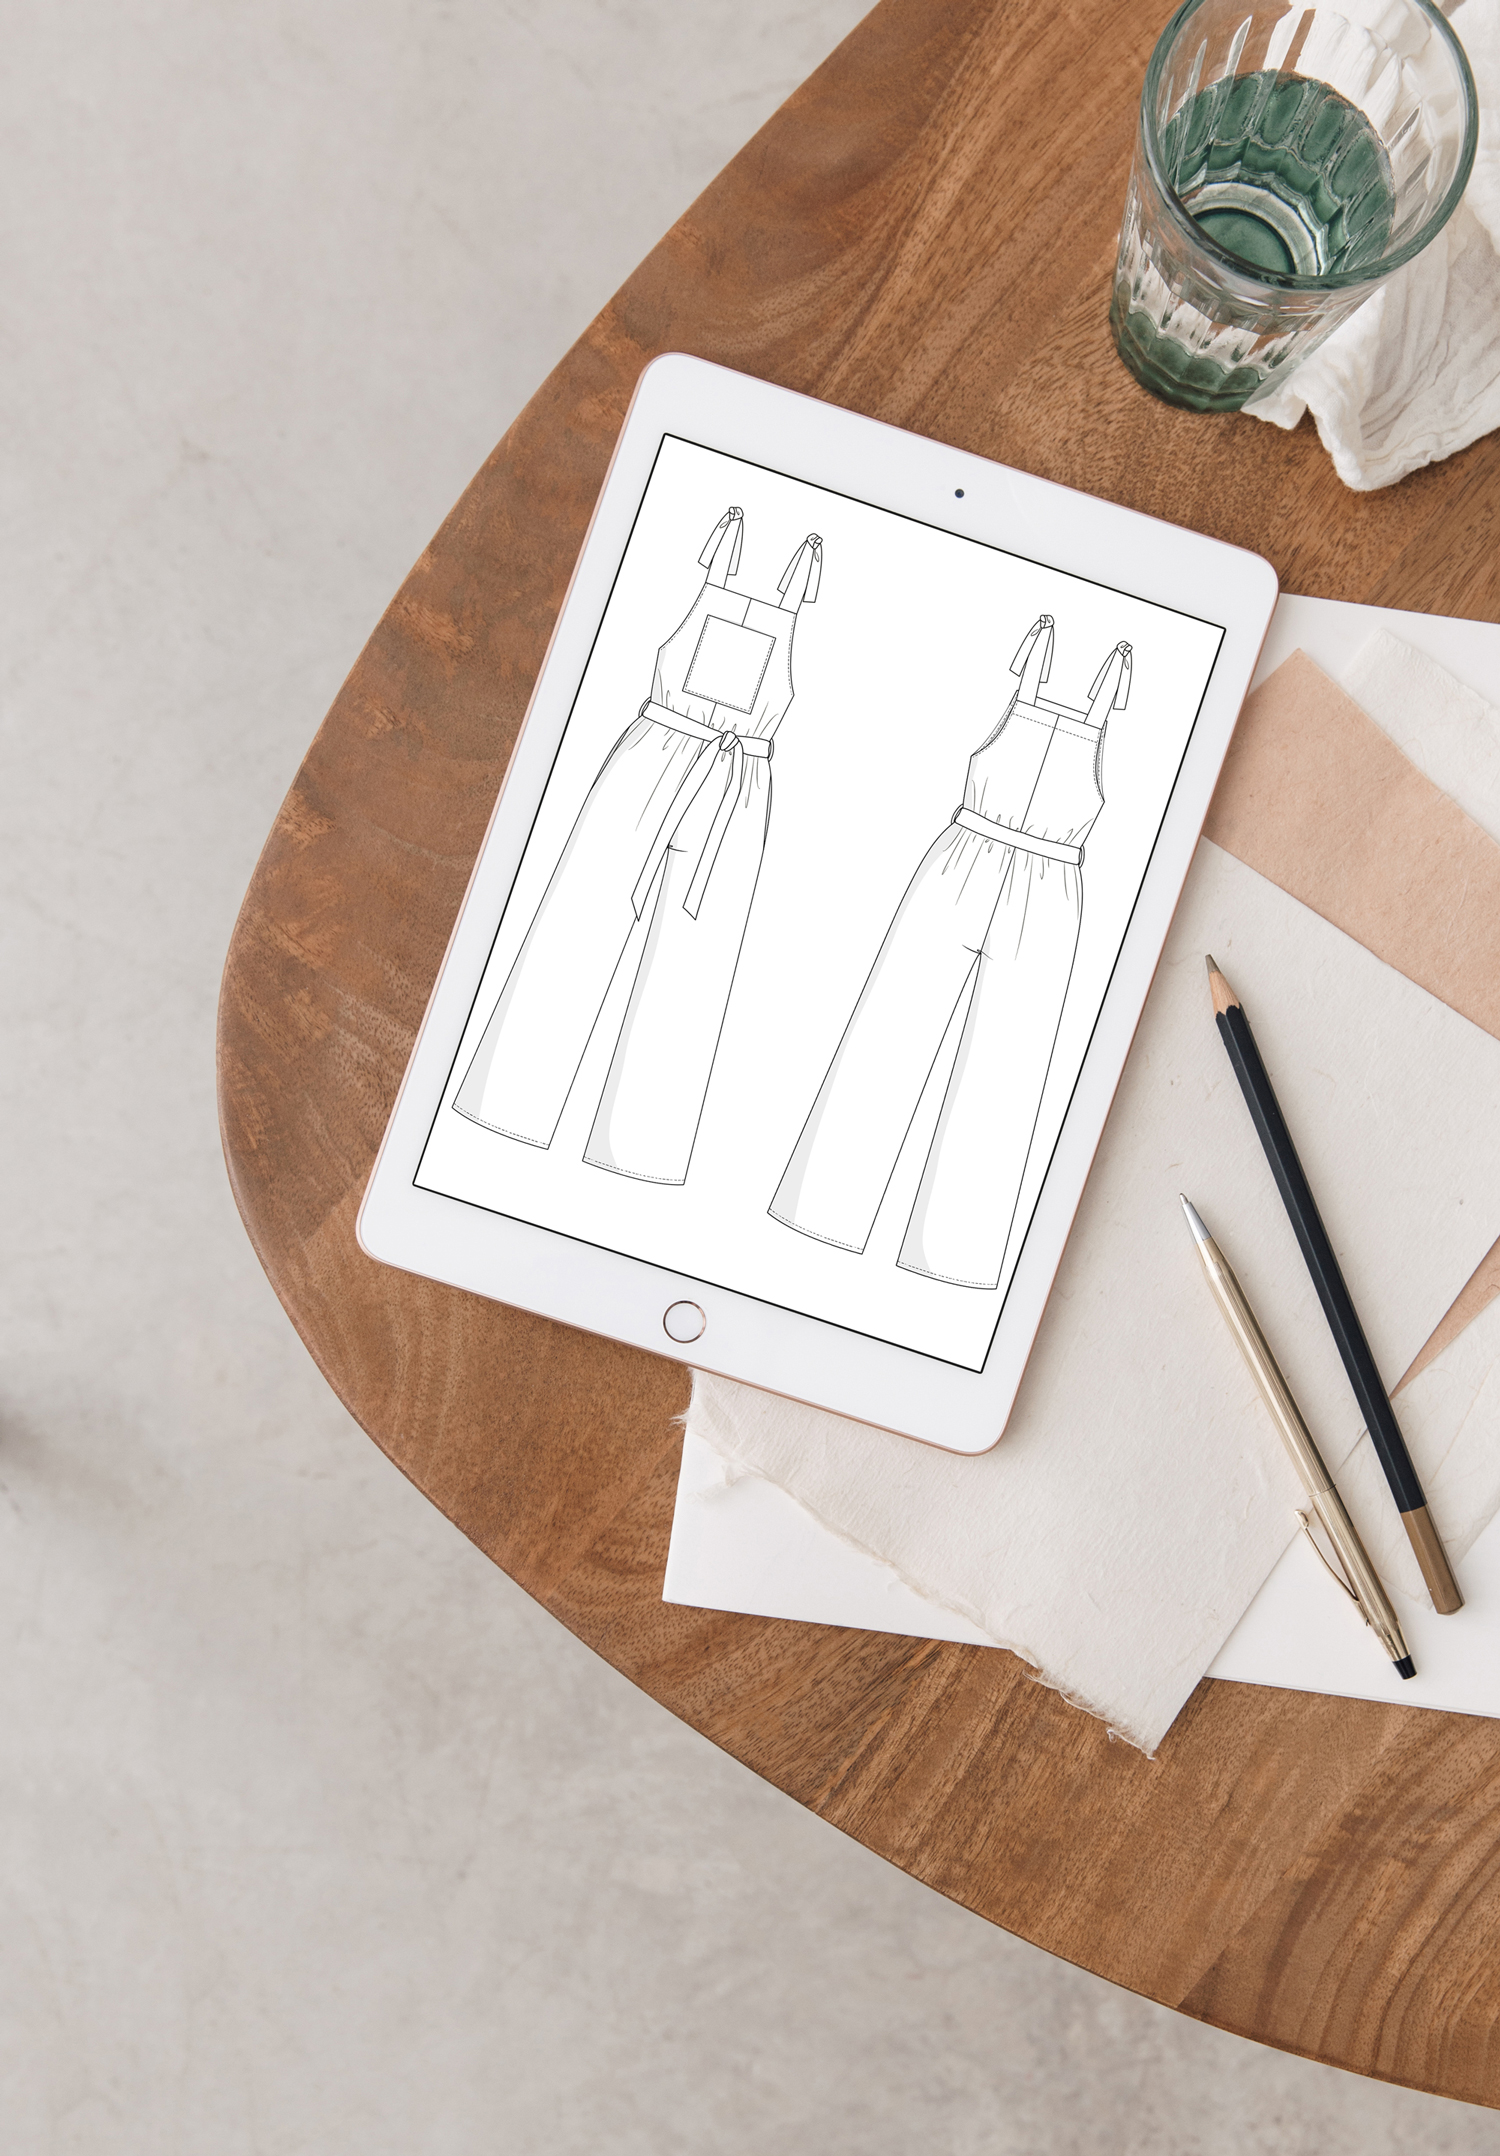 How to digitize sewing patterns to sell